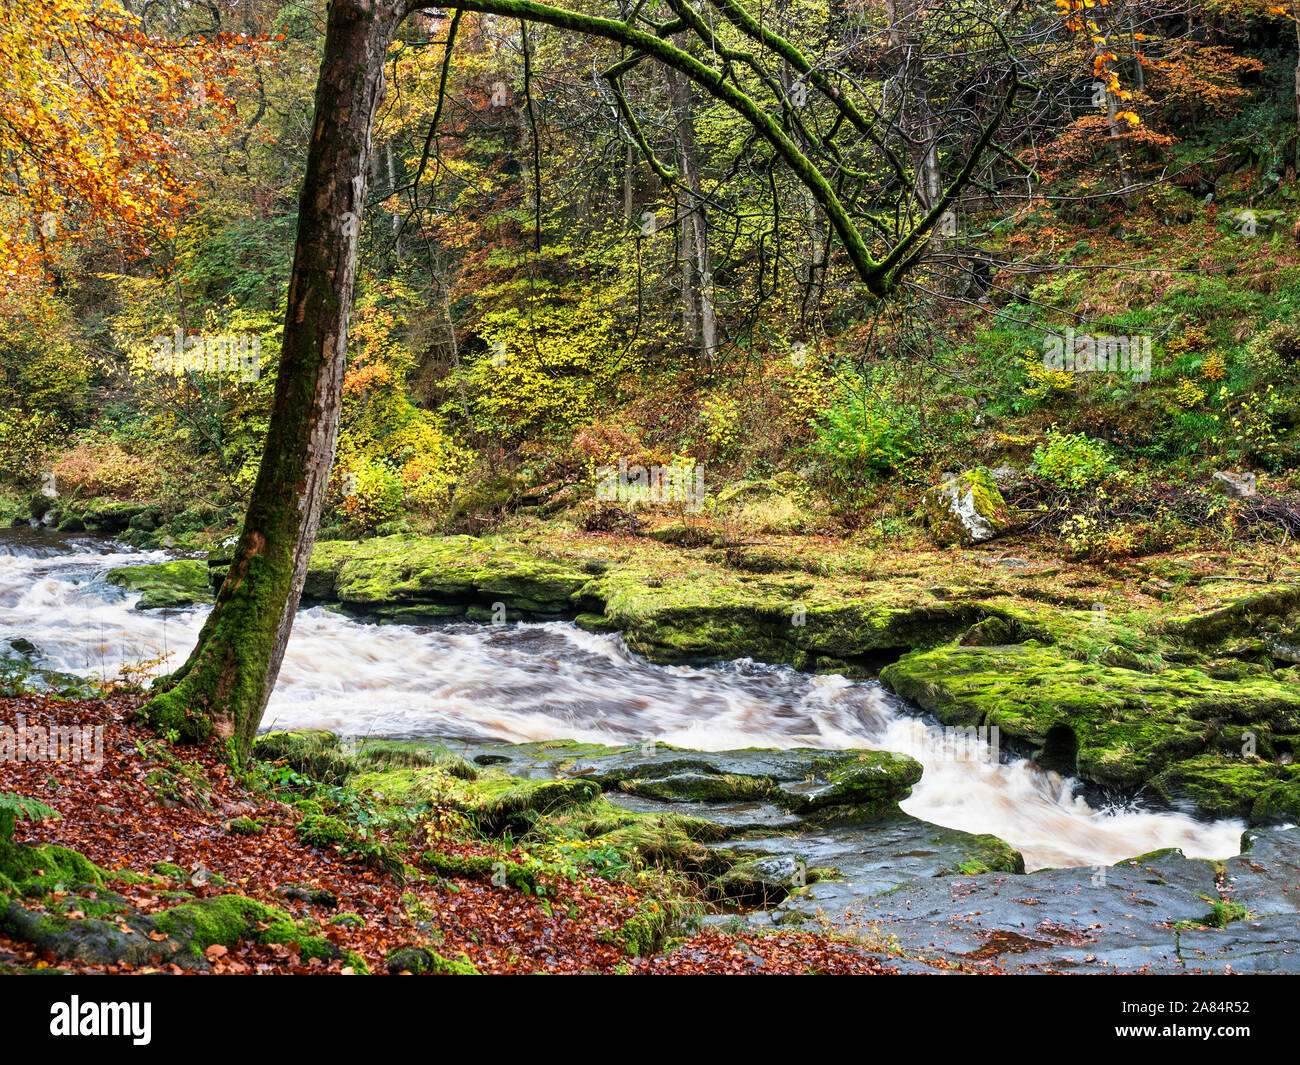 The River Wharfe flows rapidly through The Strid in Strid Wood Bolton Abbey Yorkshire Dales England Stock Photo